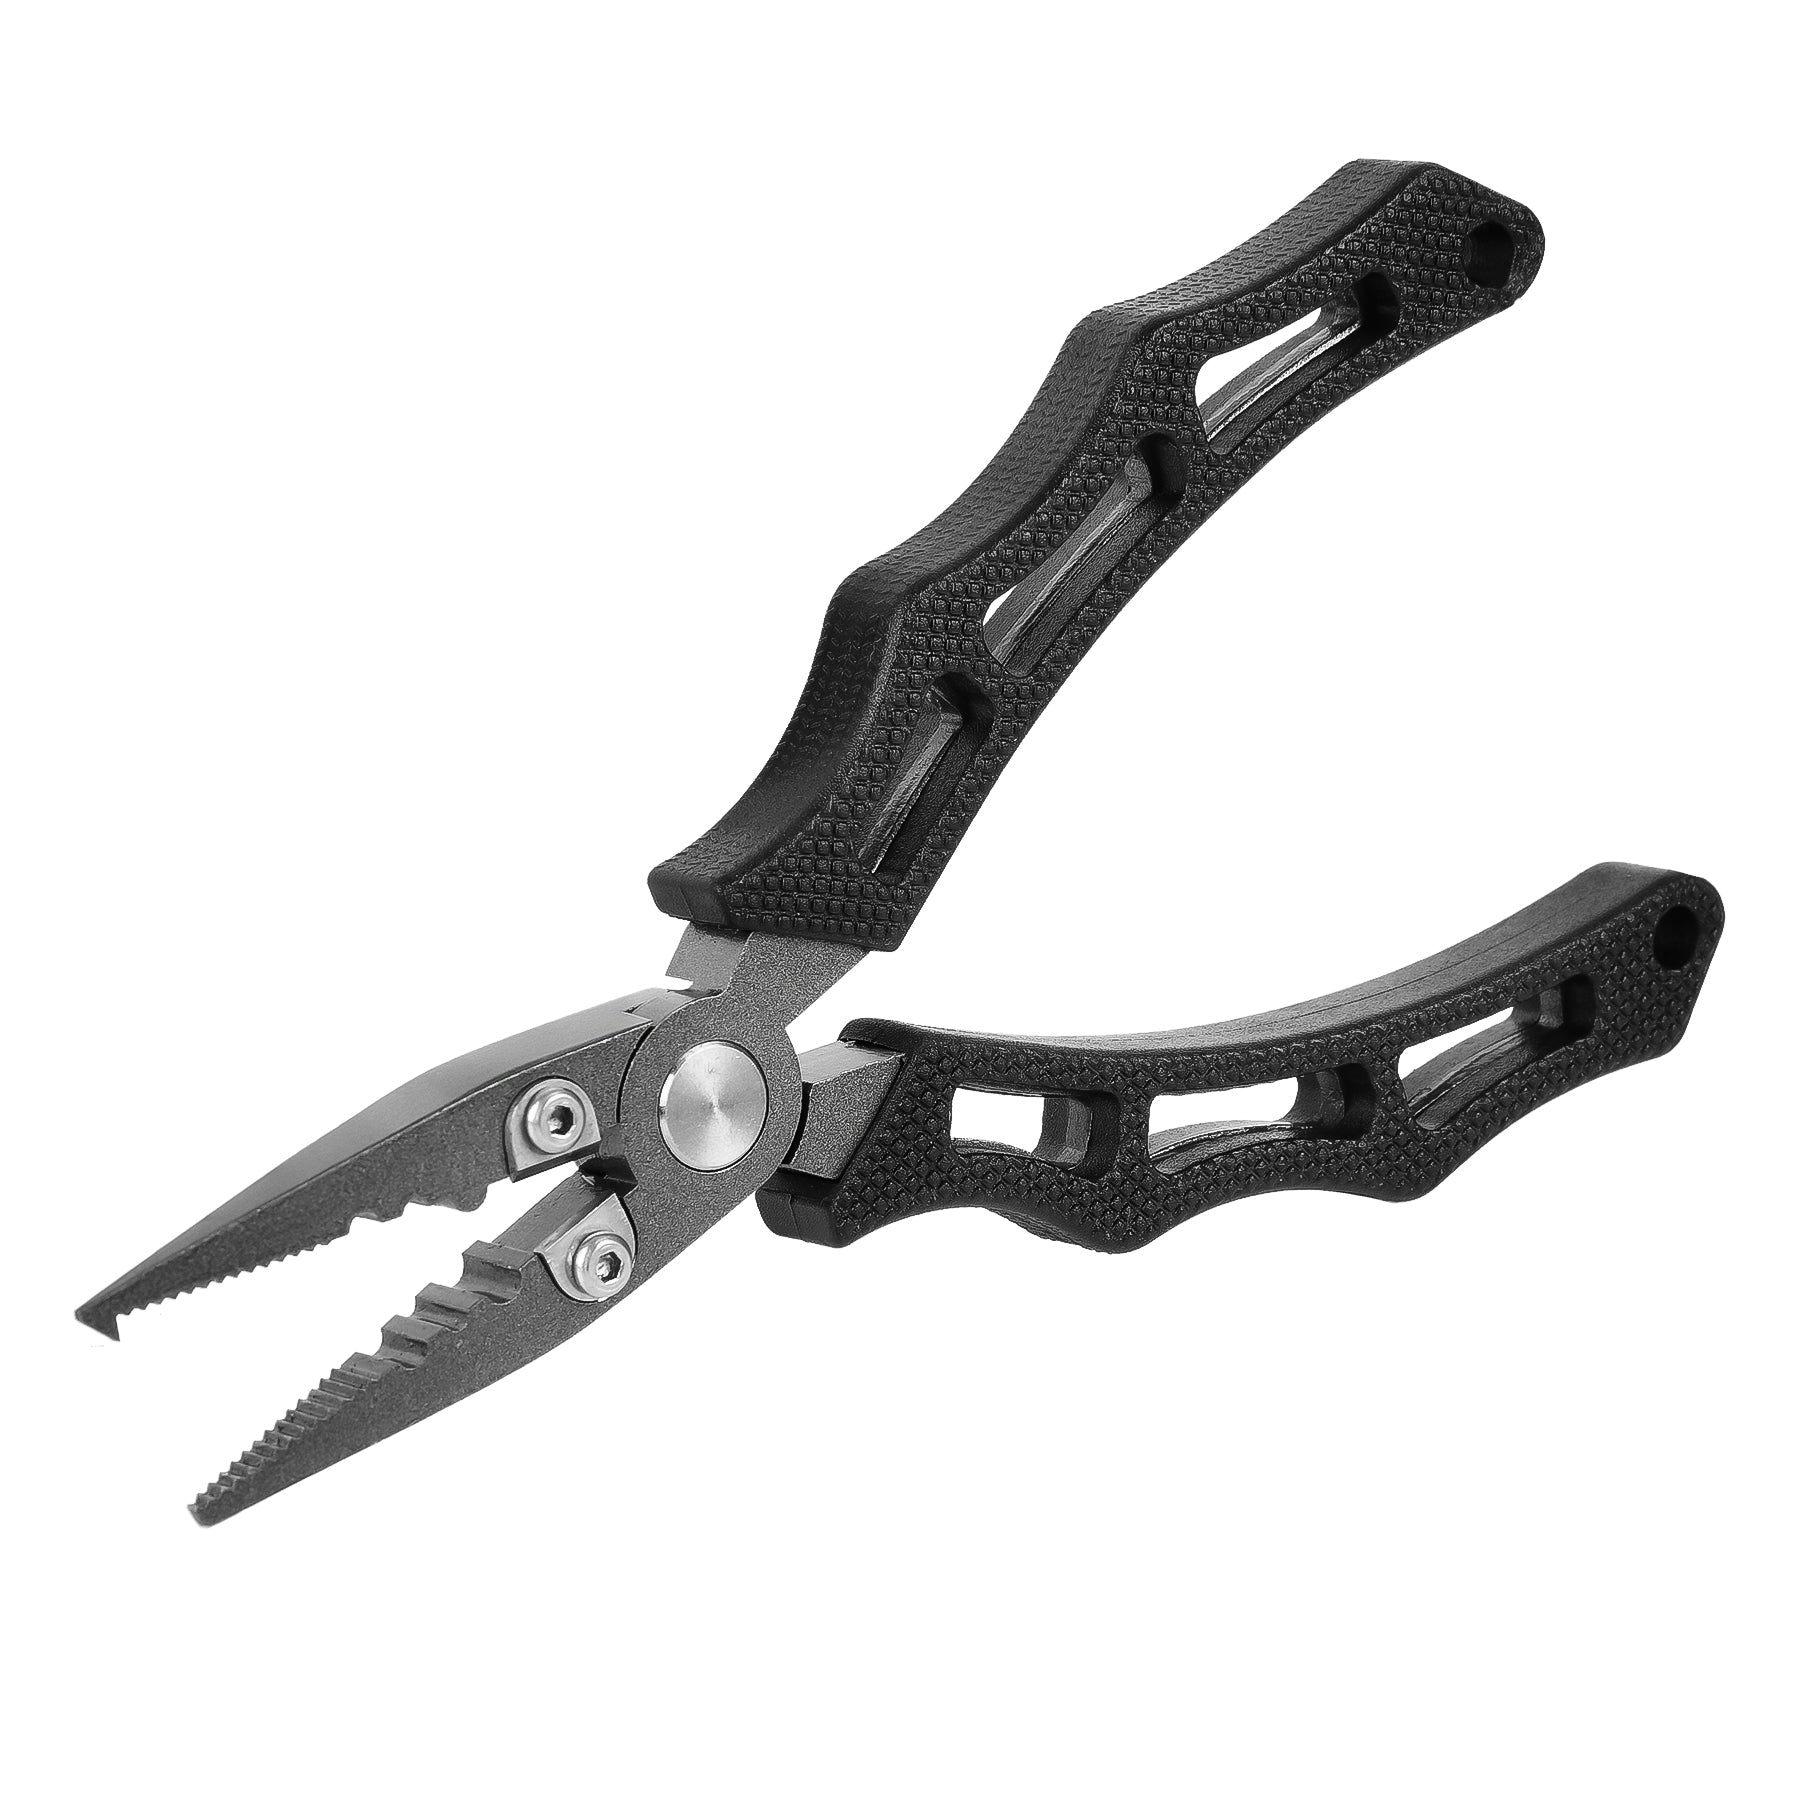 FRICHY CX07-6 STAINLESS STEEL FISHING PLIERS FISHING TOOL